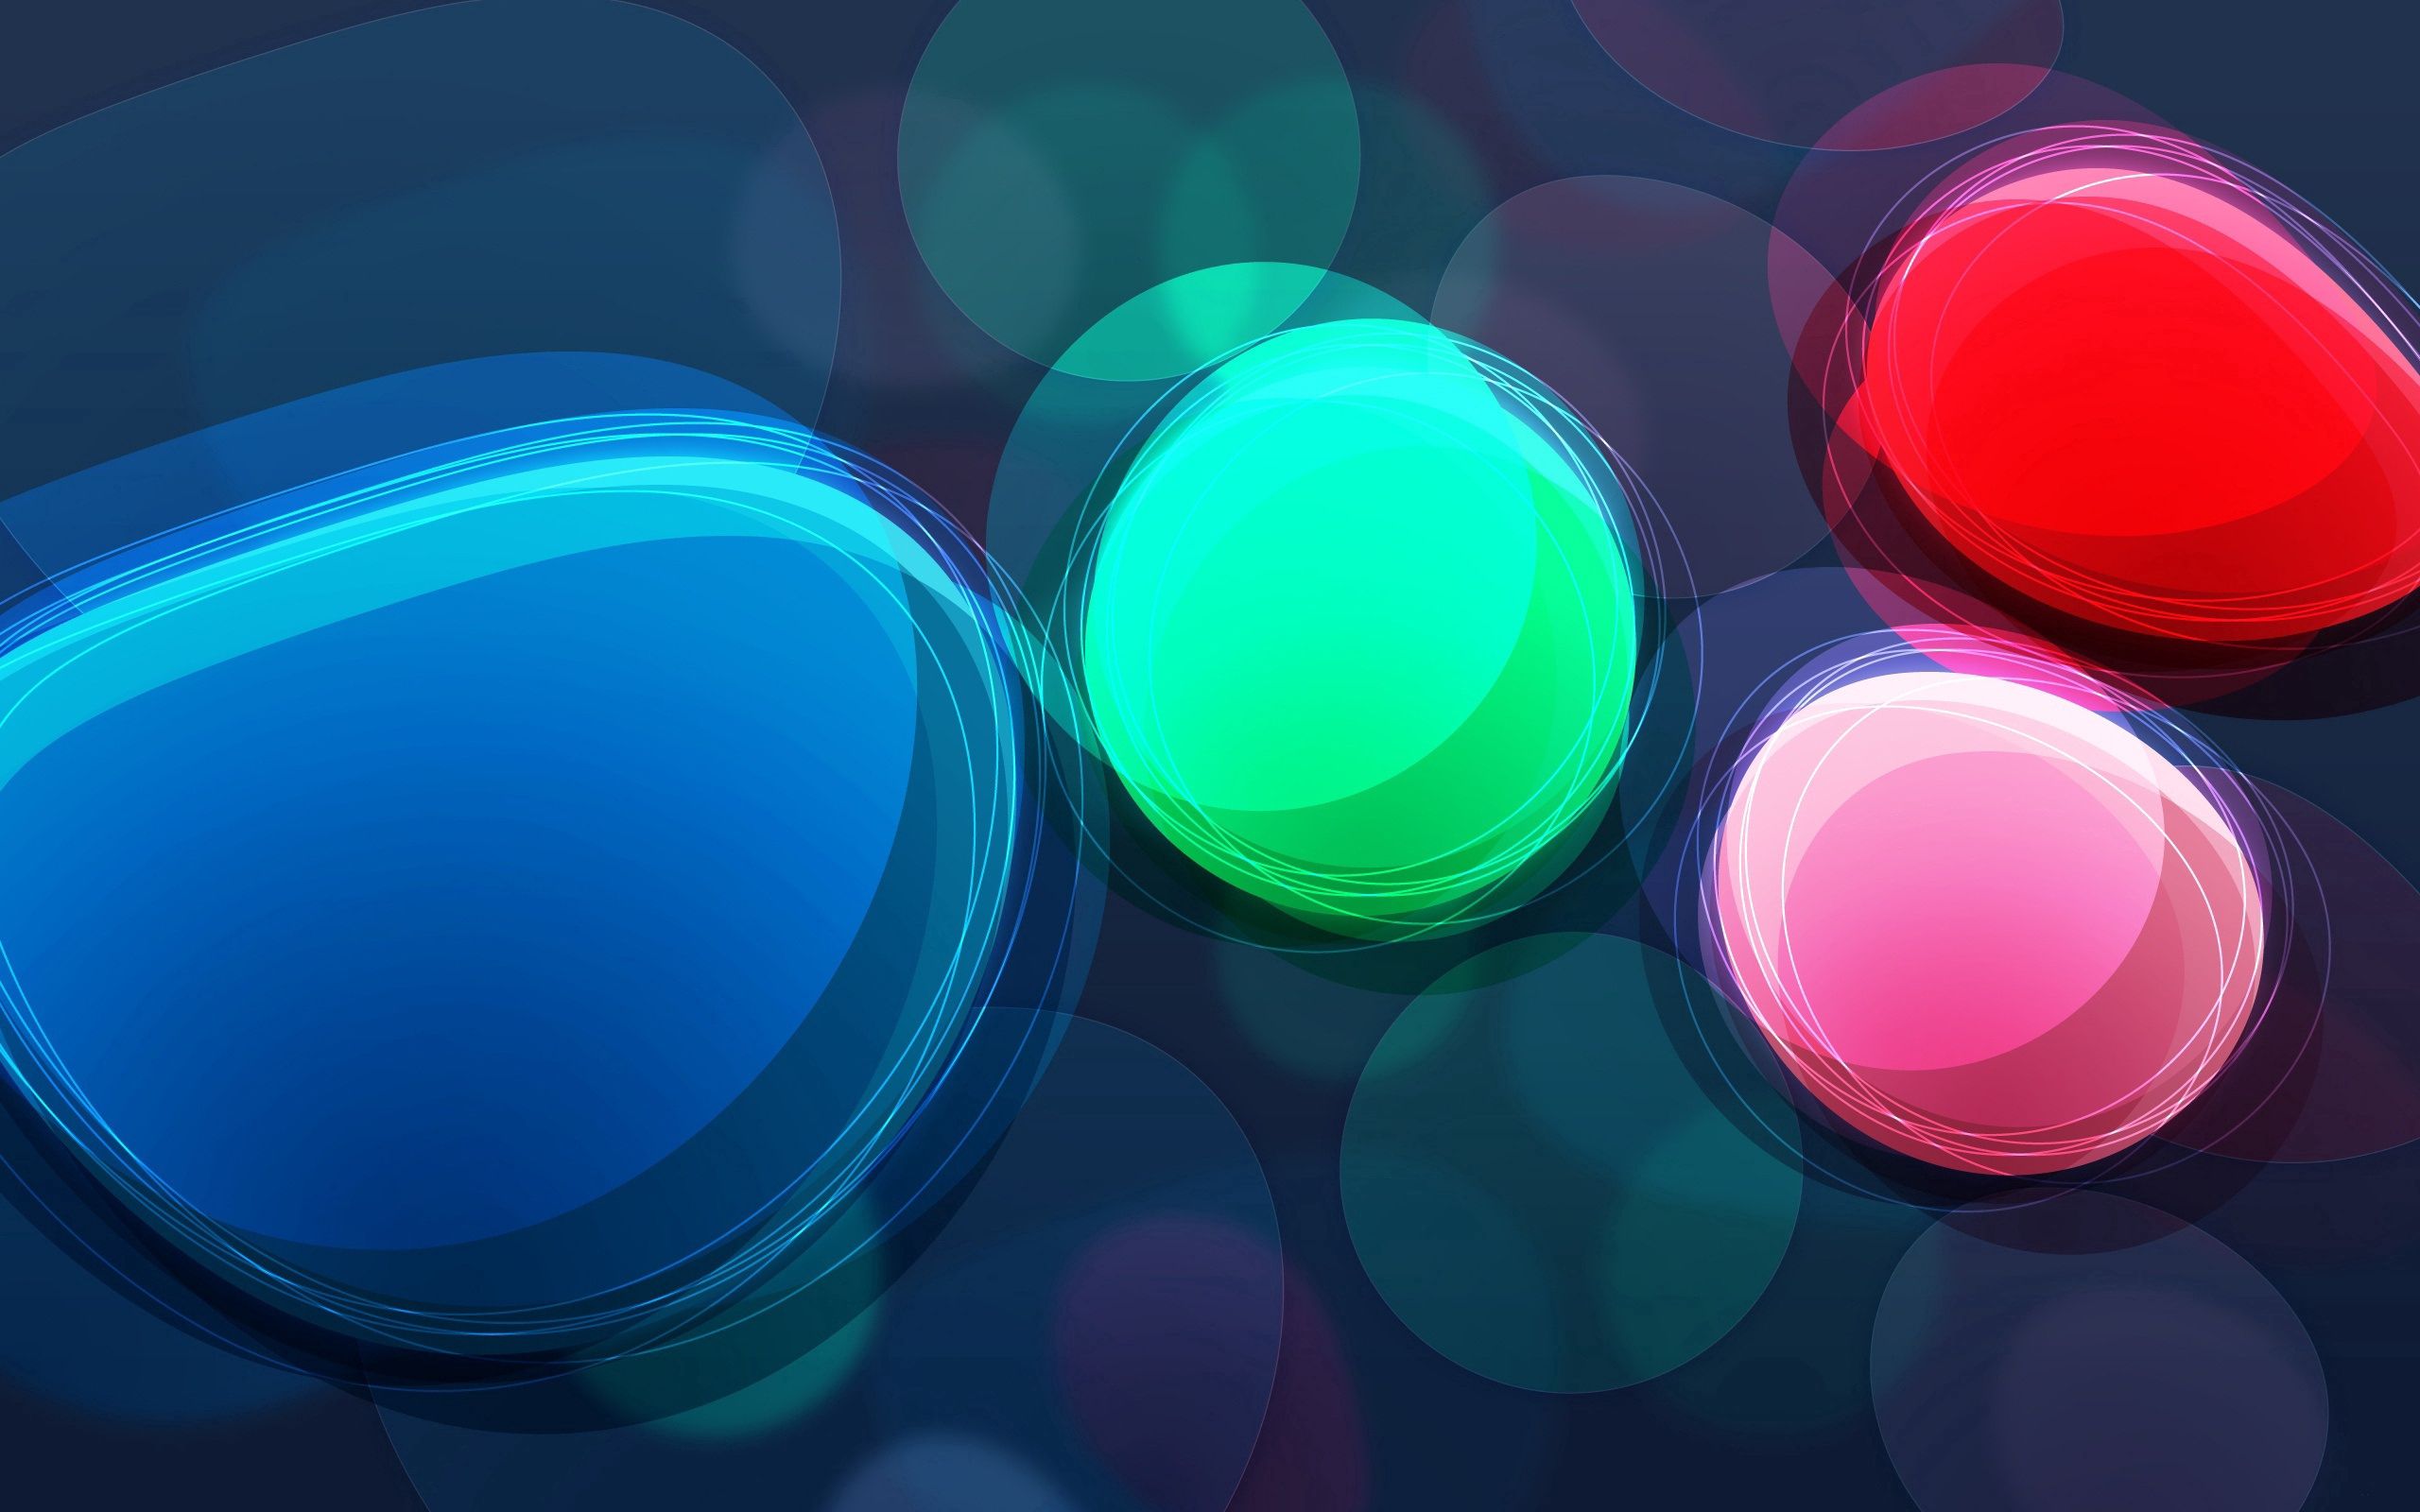 desktop Images multicolored, colorful, colourful, abstract, circles, motley